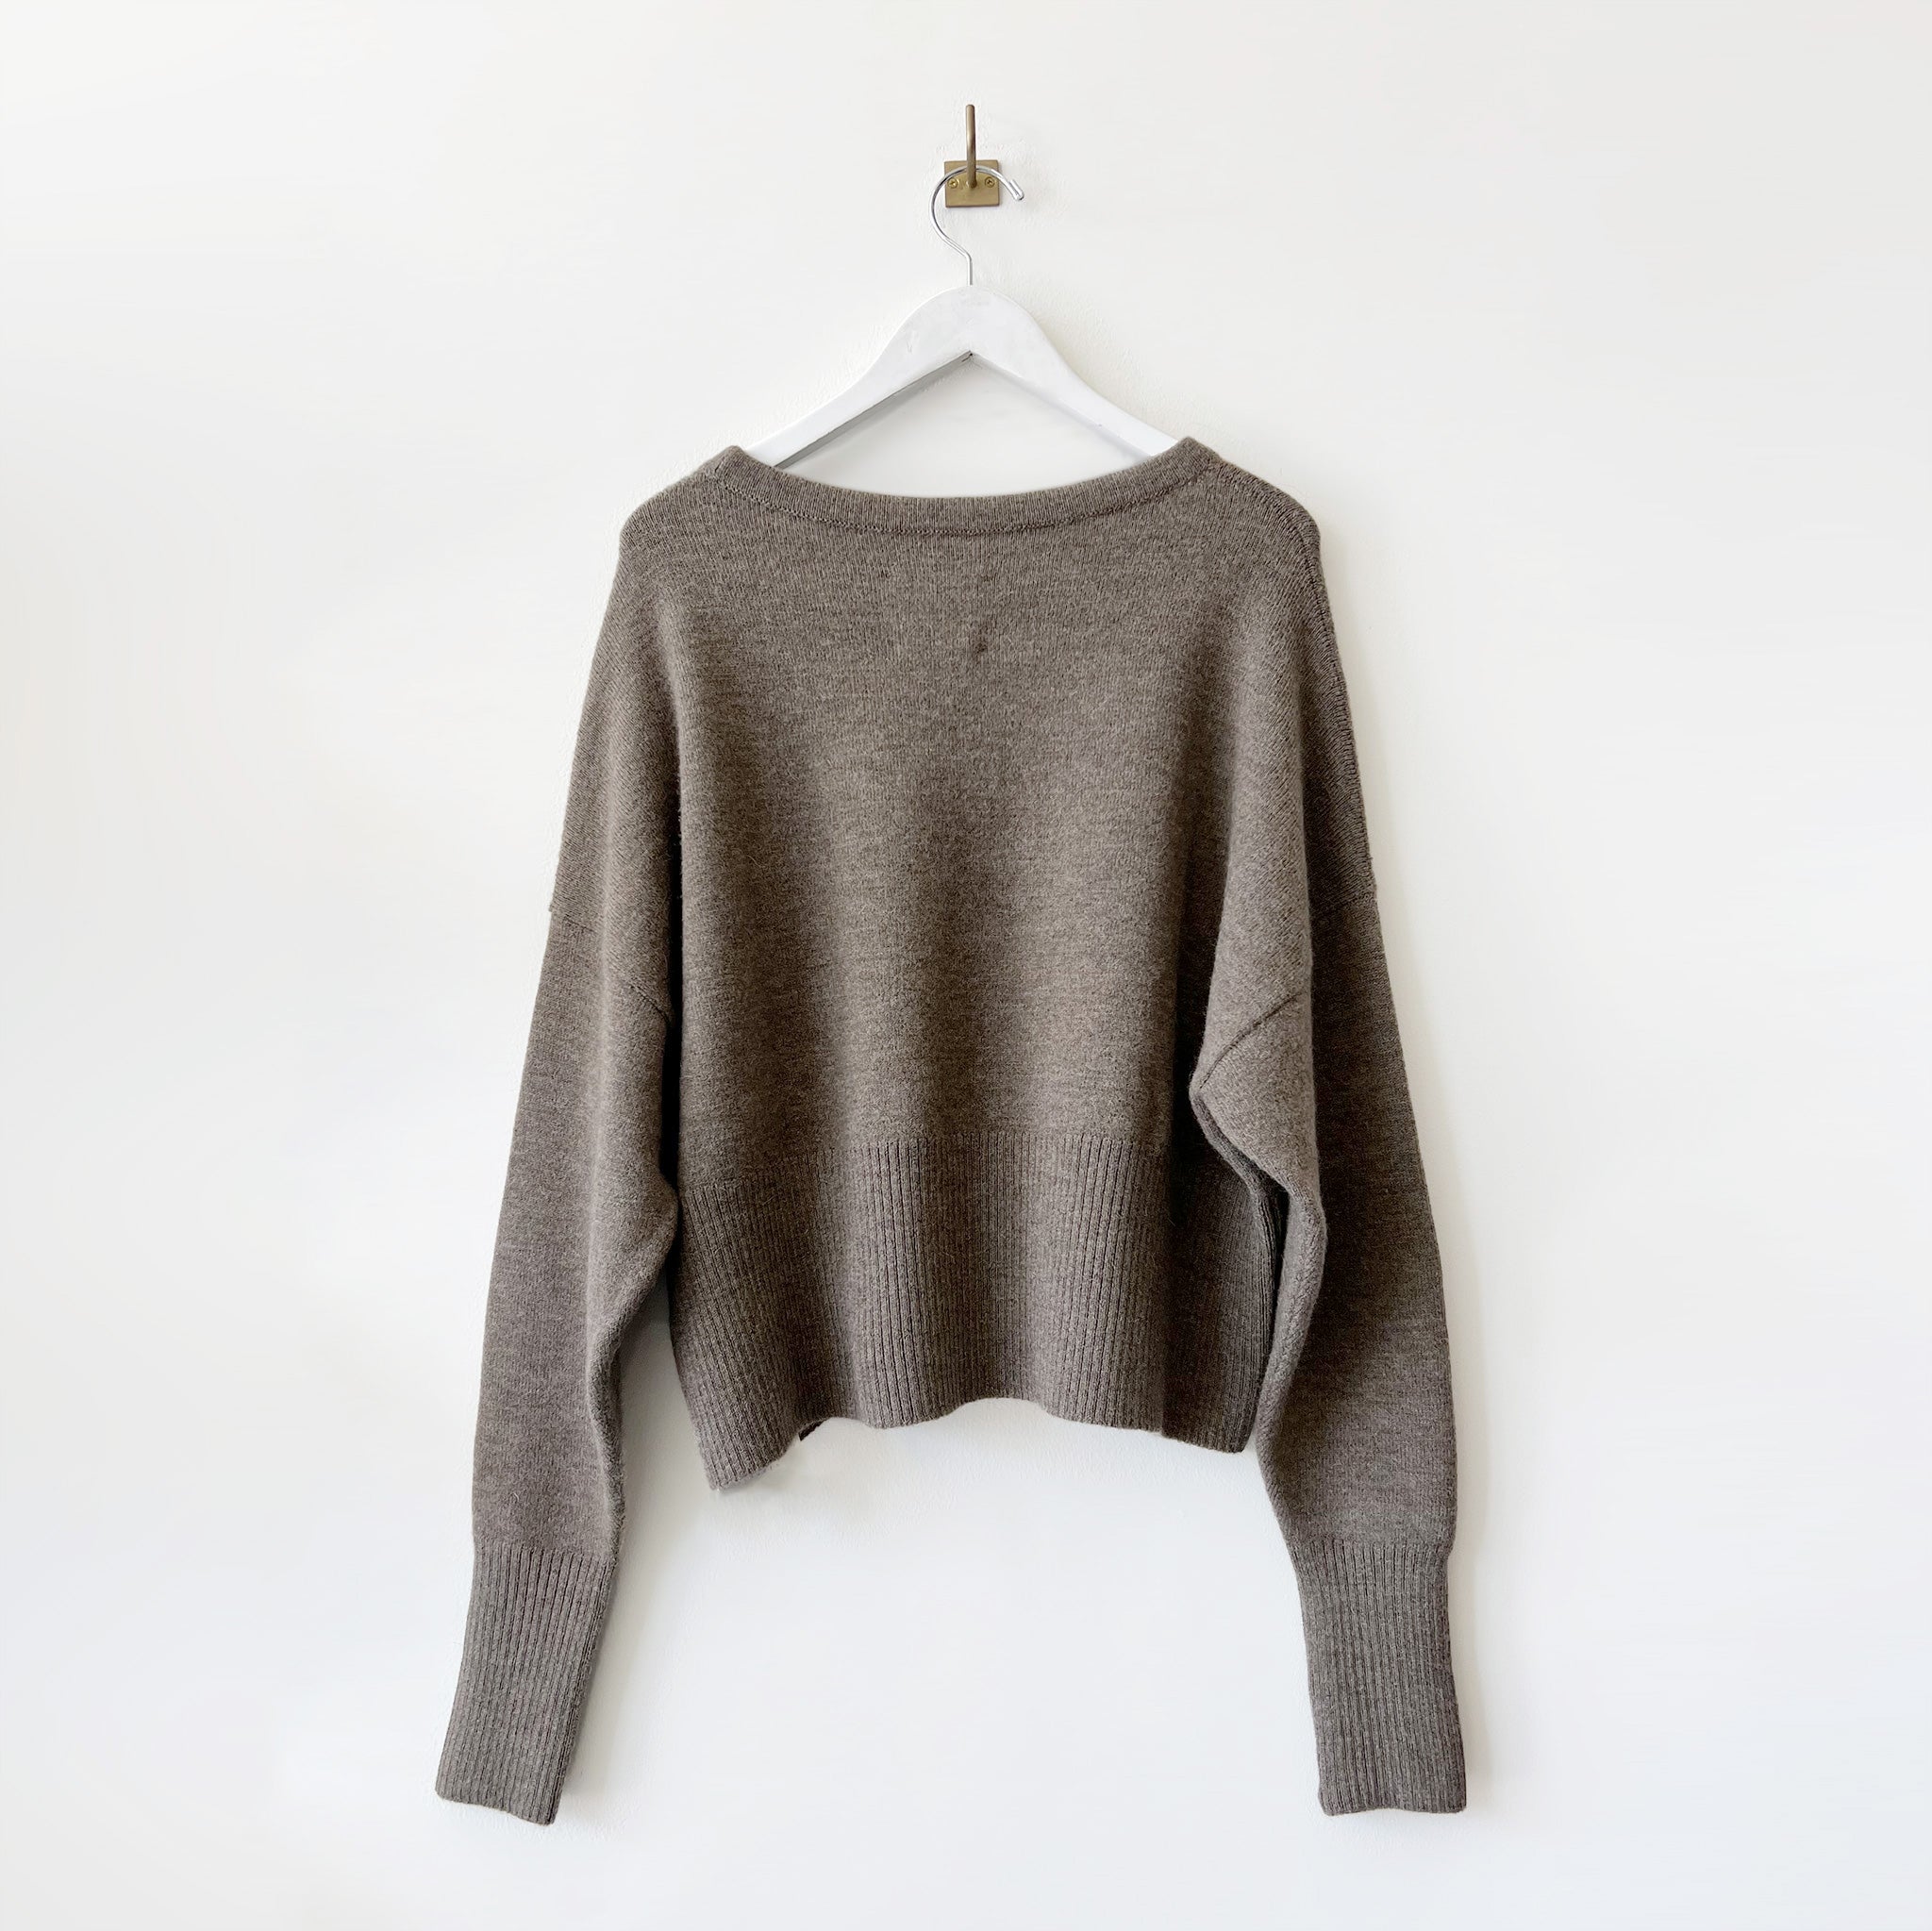 A boxy crewneck sweater with long loose sleeves and a cropped waist - back side.